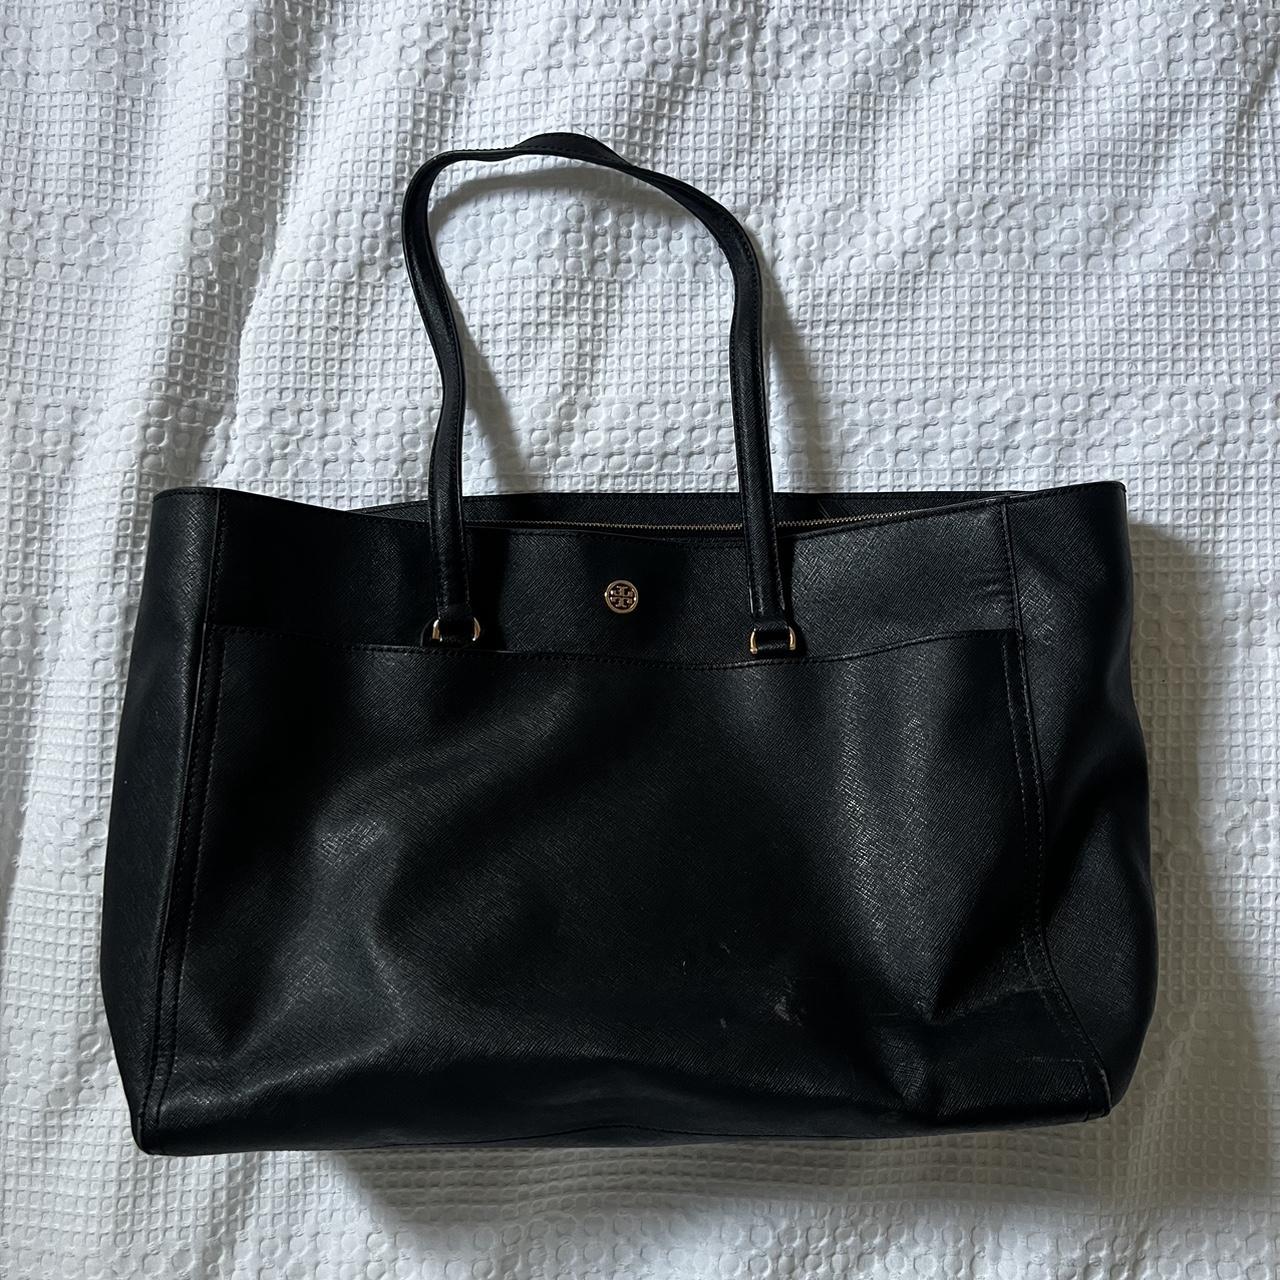 Tory Burch, Bags, Tory Burch Large Black Saffiano Leather Tote Bag